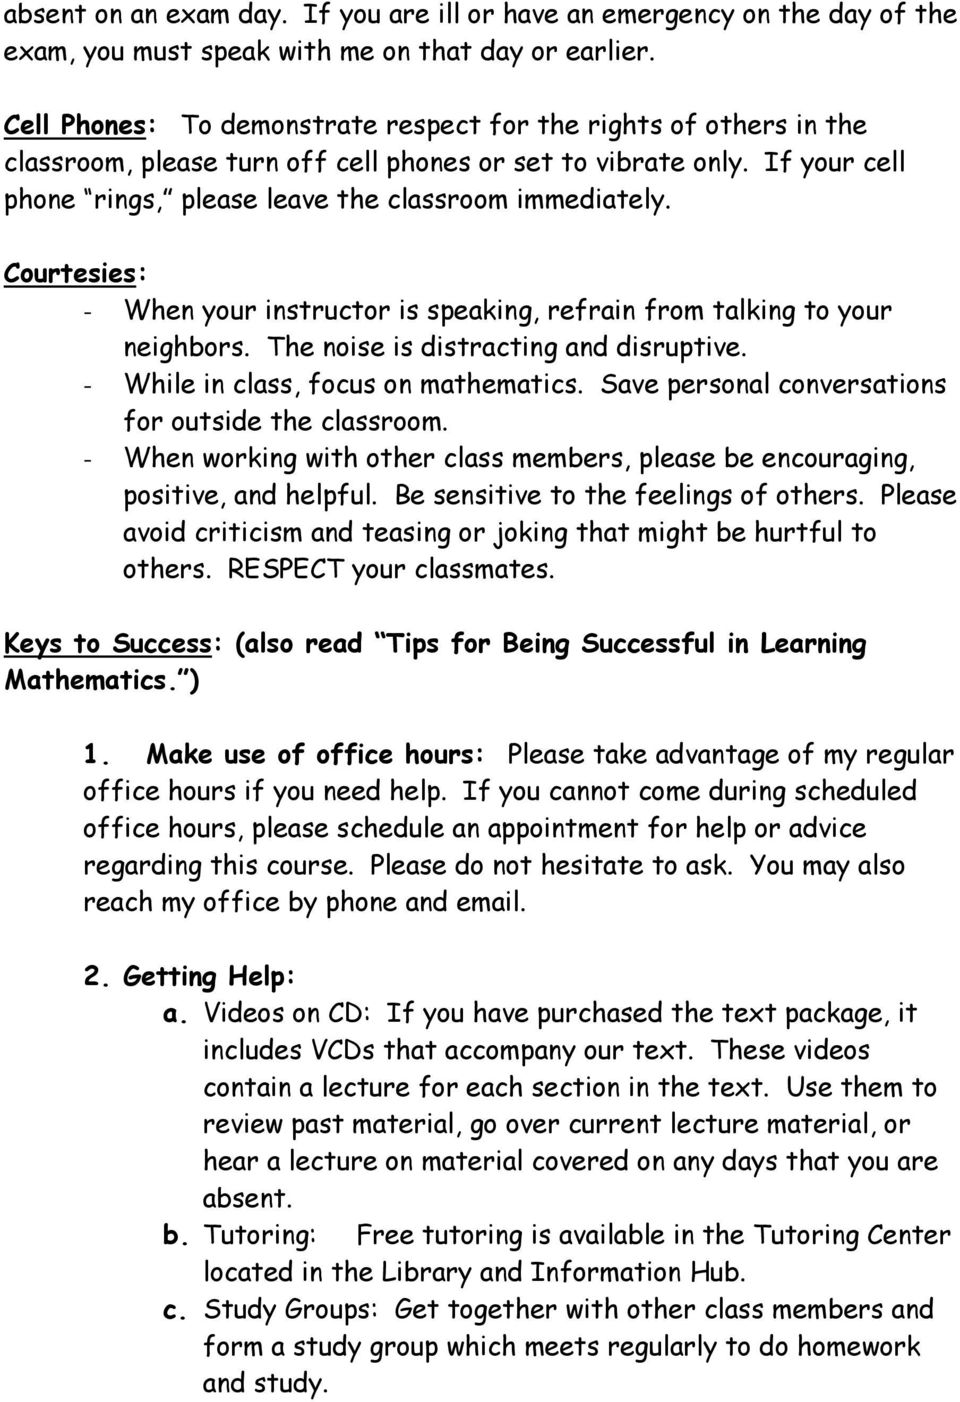 Courtesies: - When your instructor is speaking, refrain from talking to your neighbors. The noise is distracting and disruptive. - While in class, focus on mathematics.